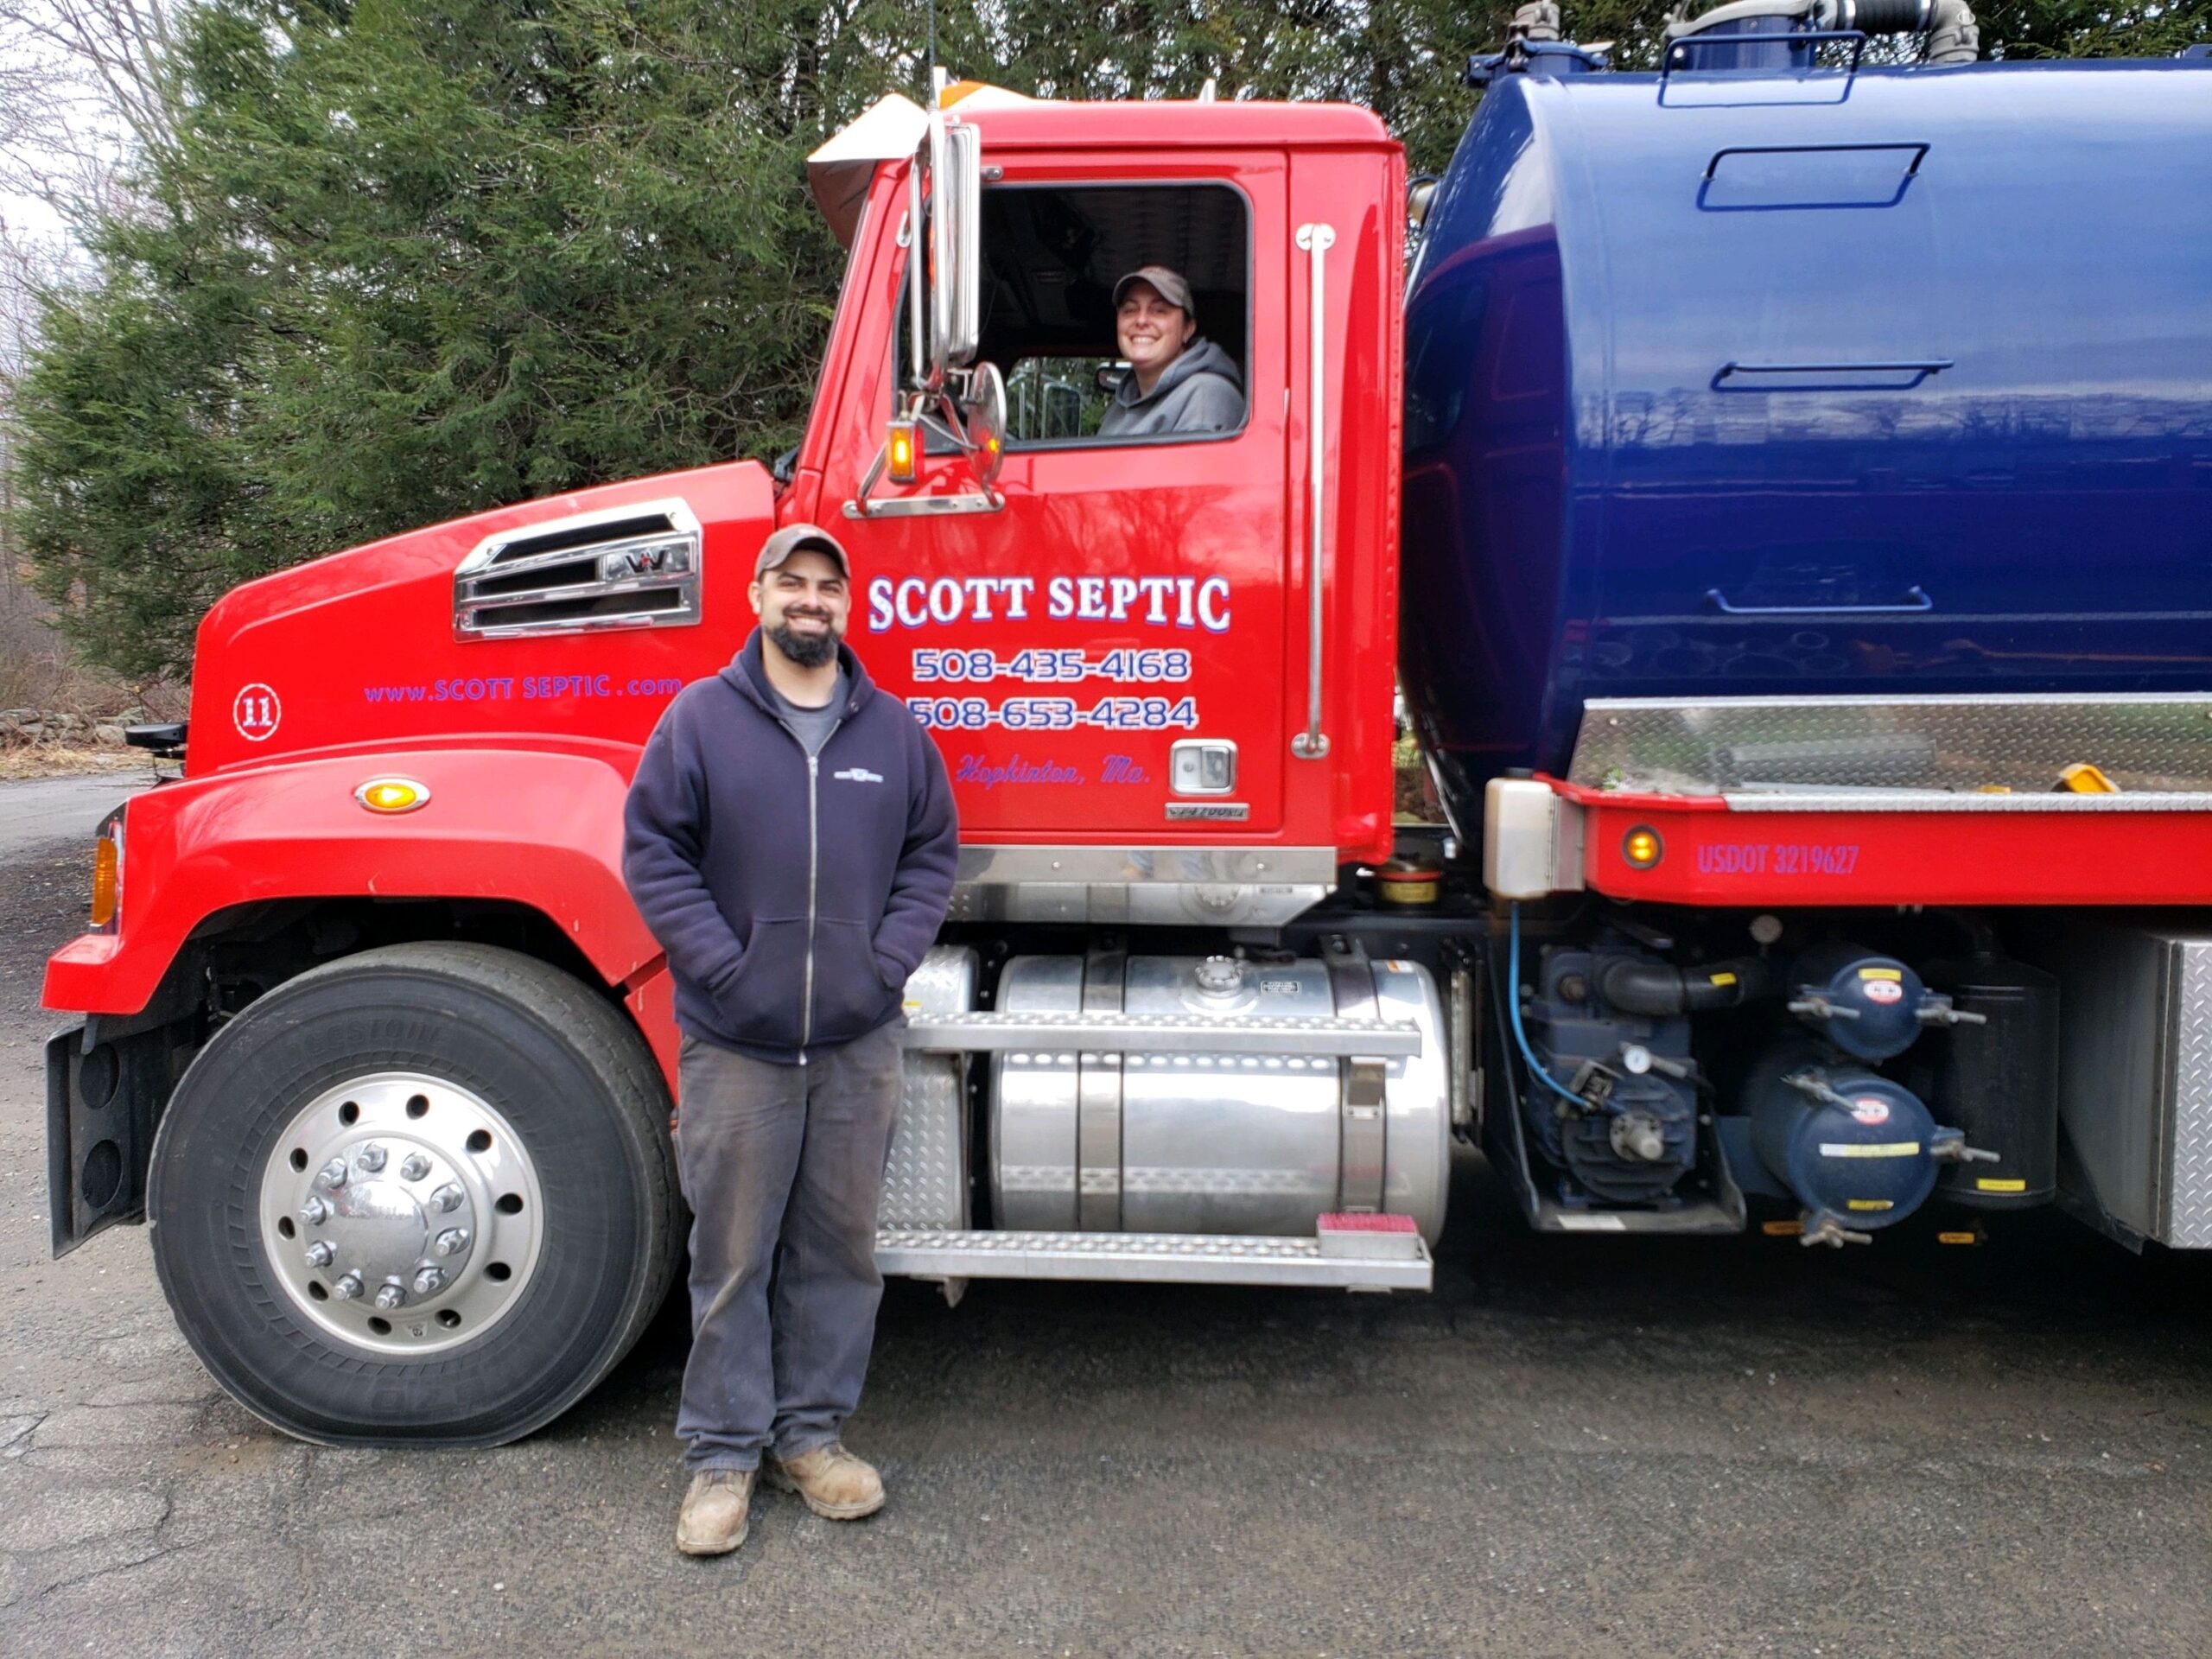 Business Profile: Scott Septic solves neighbors’ messiest problems